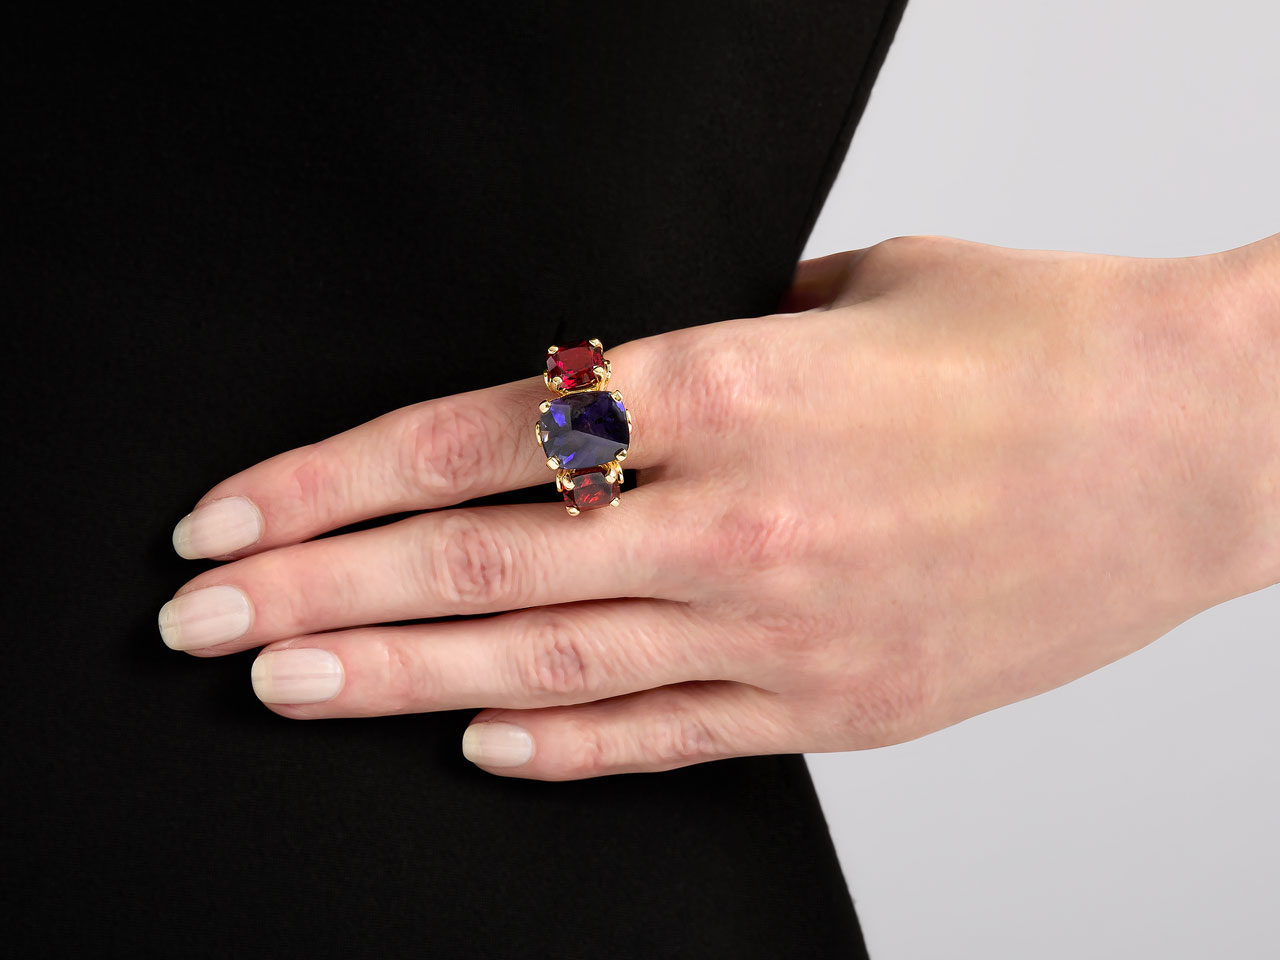 Temple St. Clair Iolite and Garnet Ring in 18K Gold